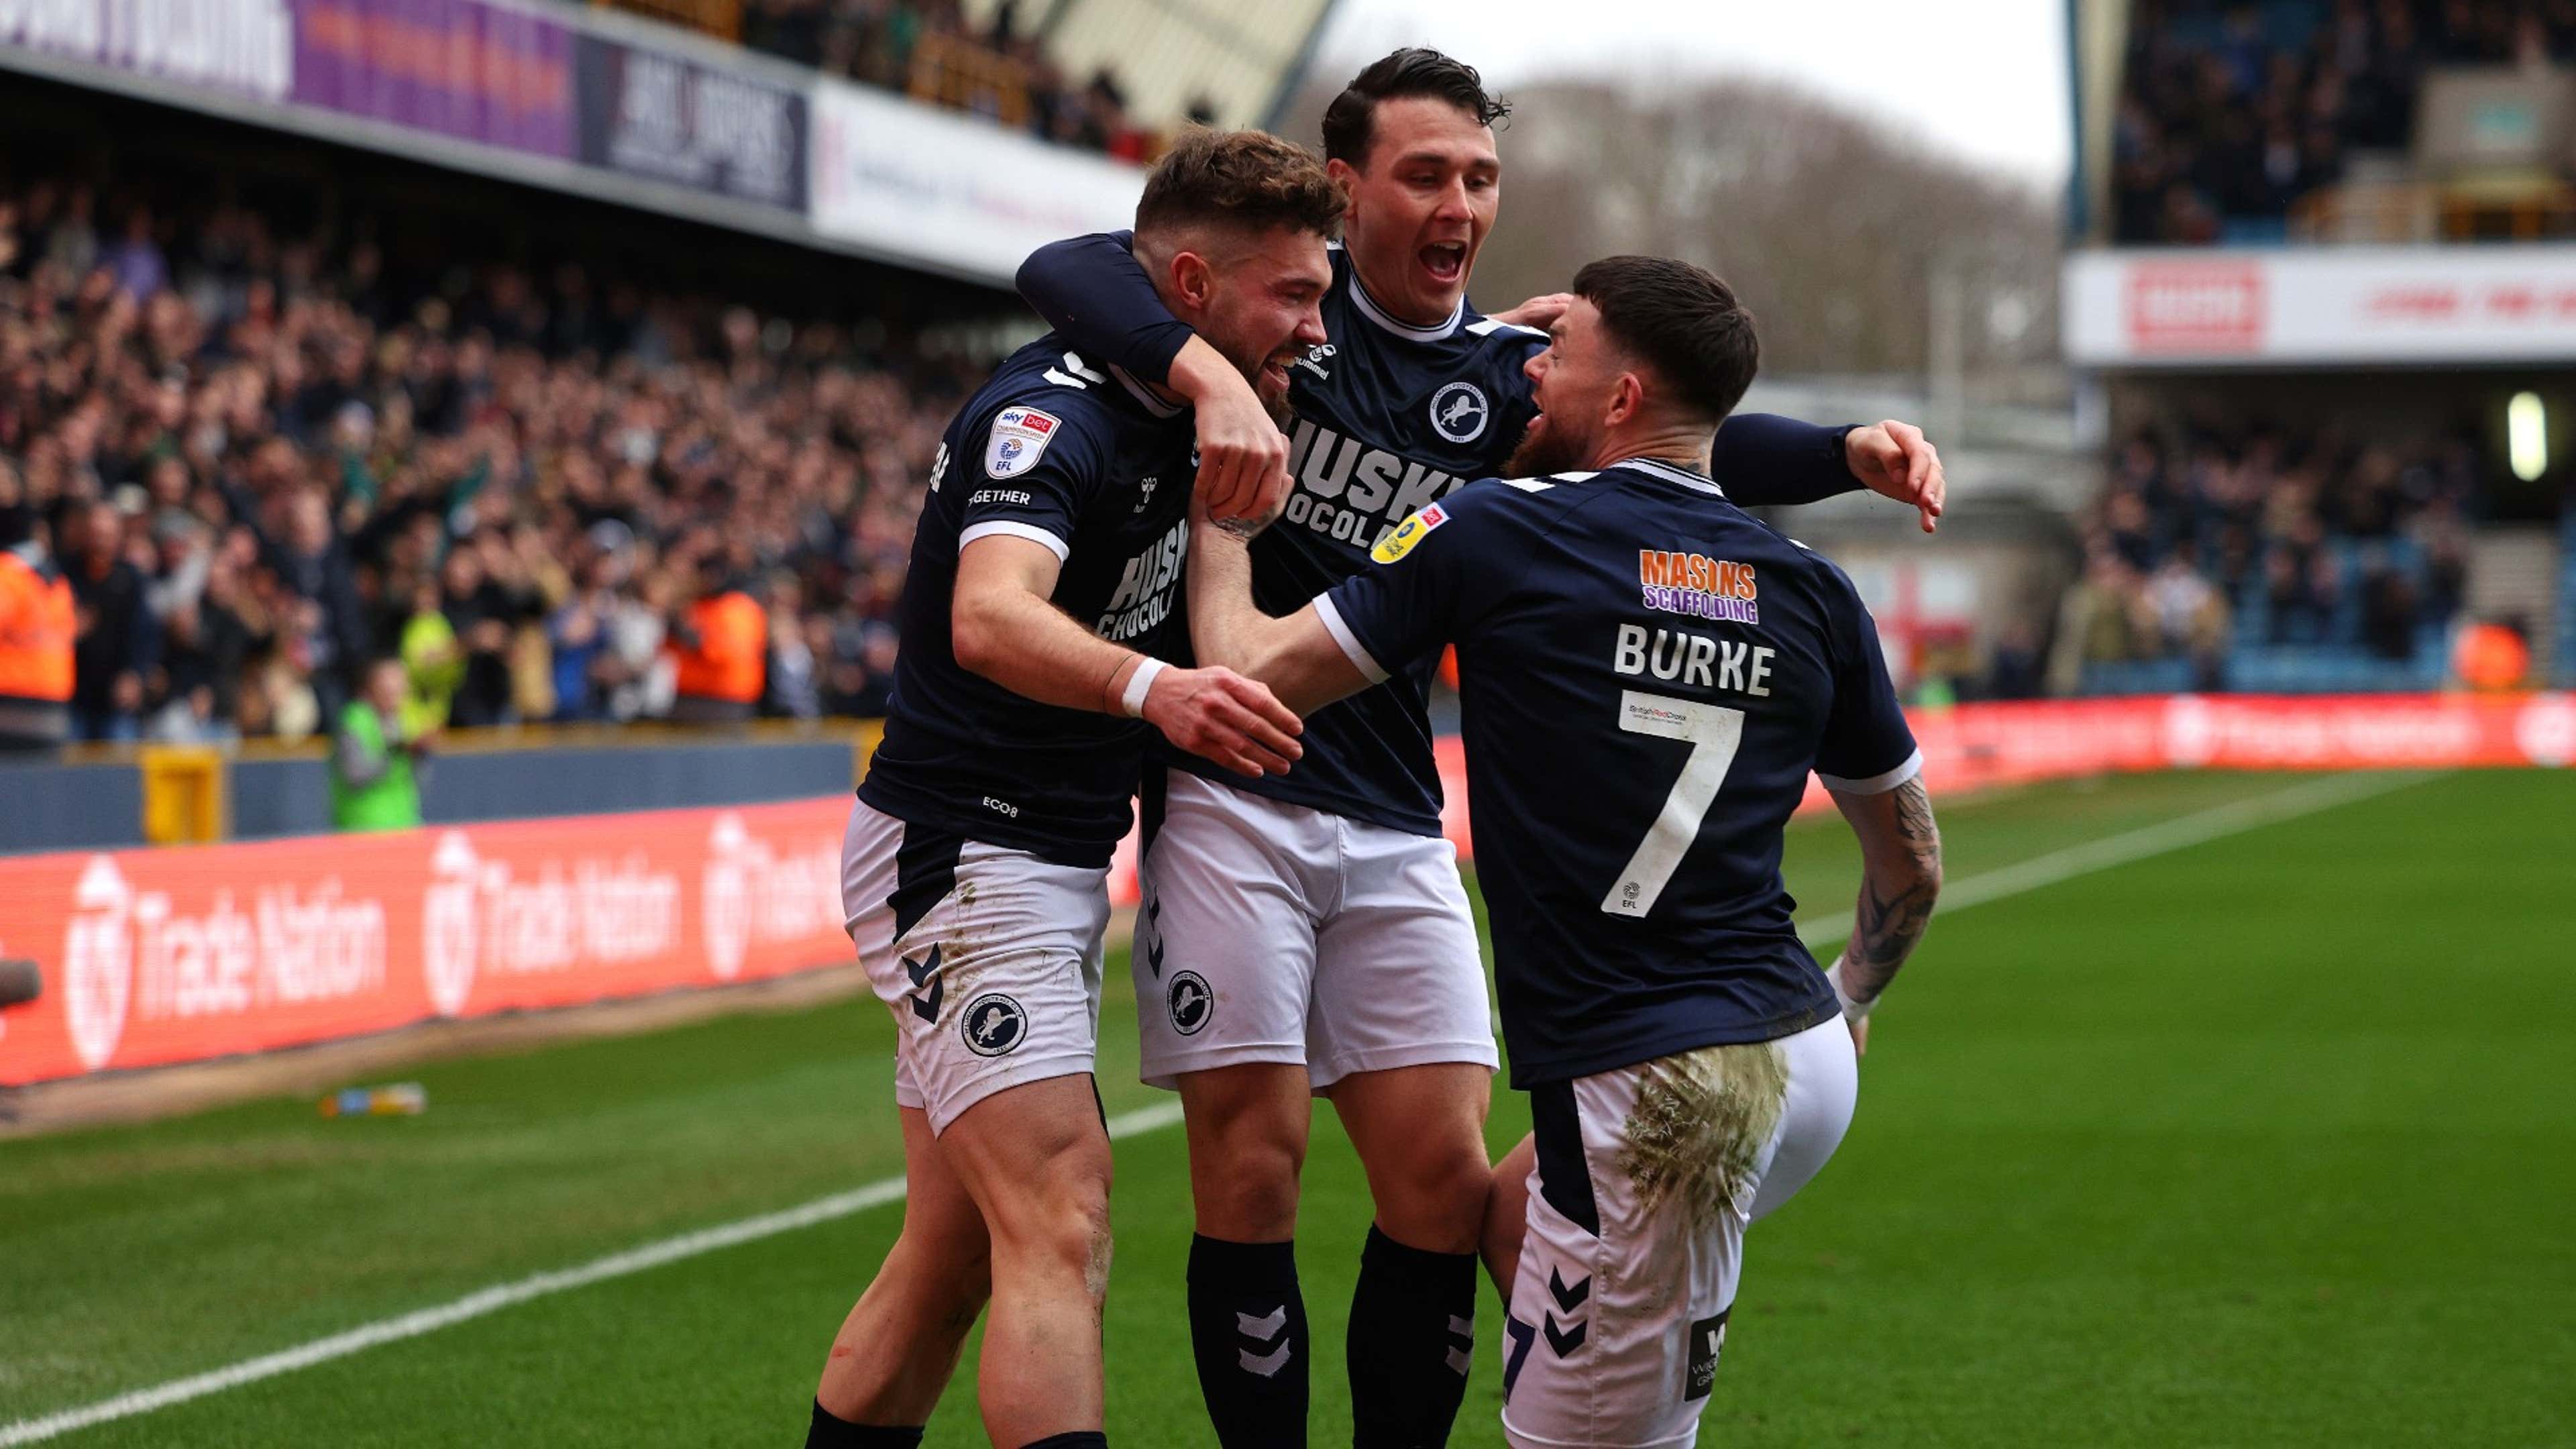 Millwall vs Luton: Where to watch the match online, live stream, TV  channels & kick-off time